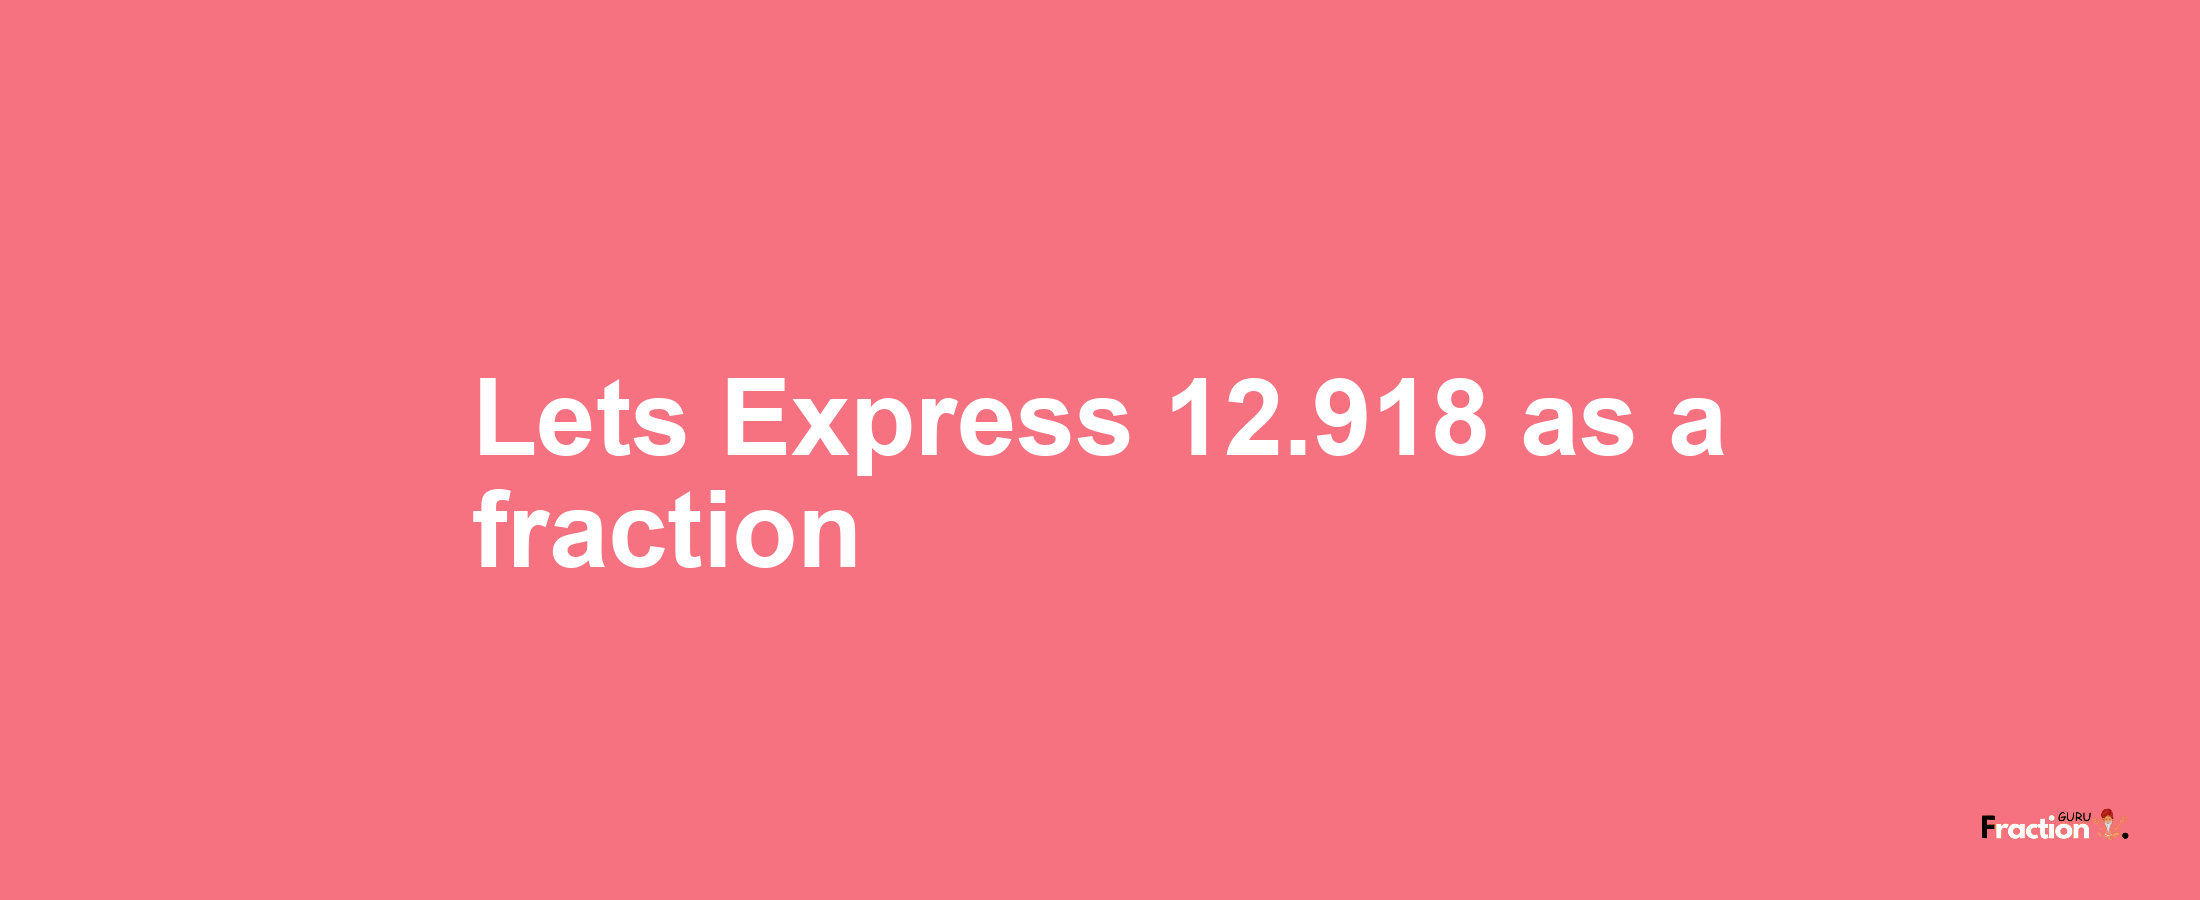 Lets Express 12.918 as afraction